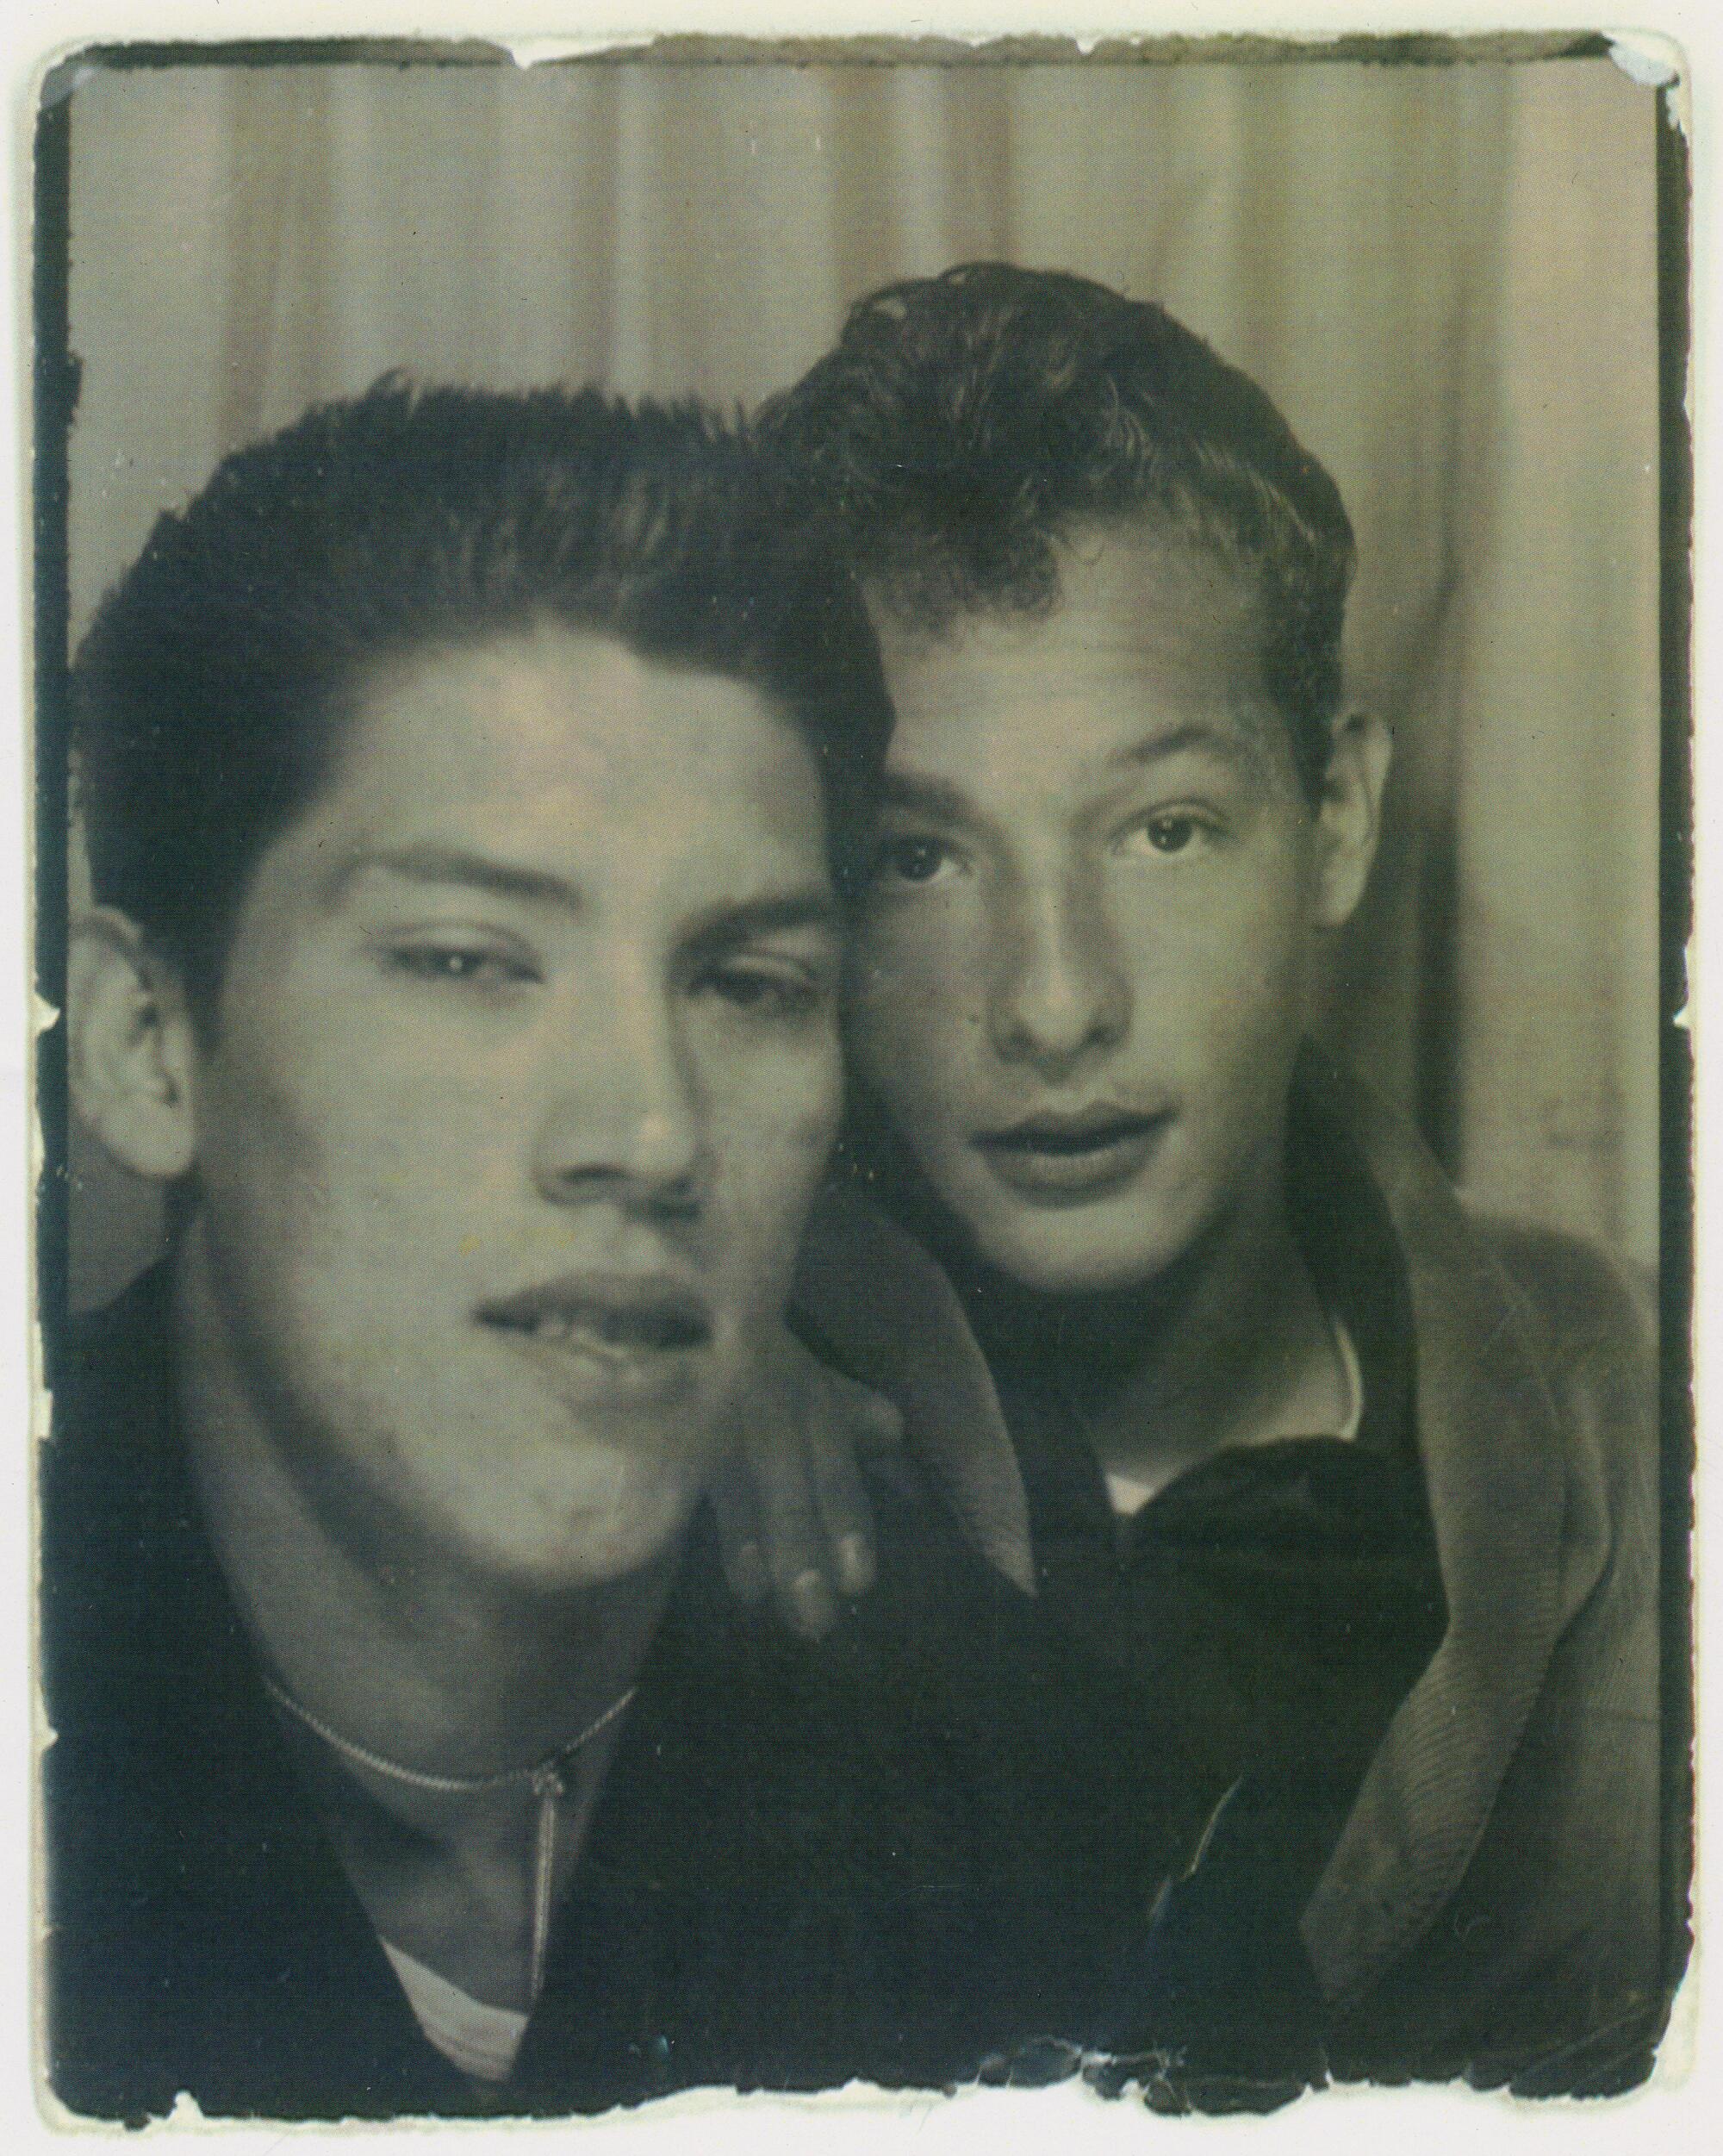 Danny Trejo and his friend Joey Meyer as youths in an old black and white photo